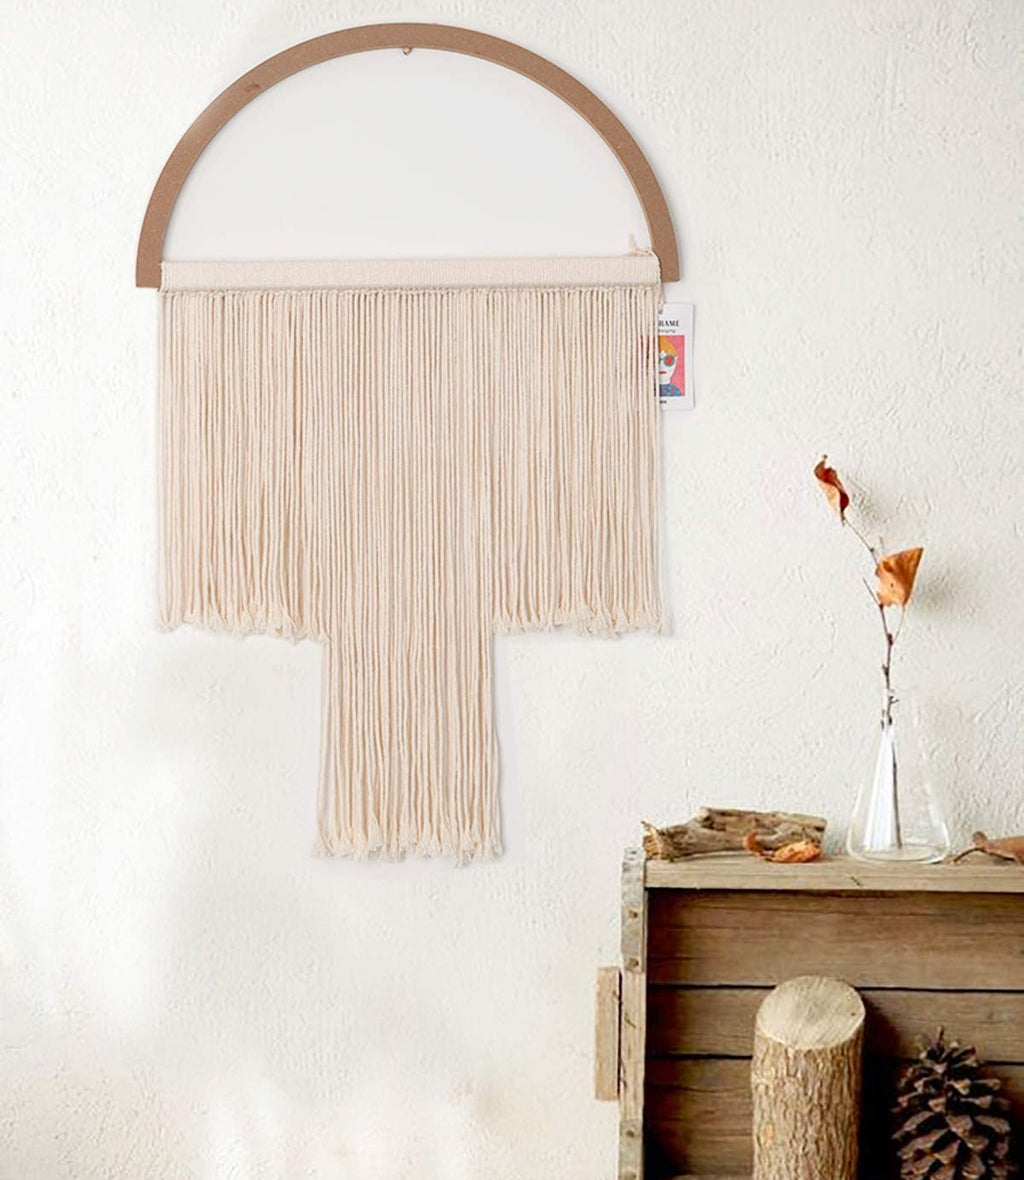 Woven Wall Hanging Decor Macrame Wall Hanging Woven Placemats Home